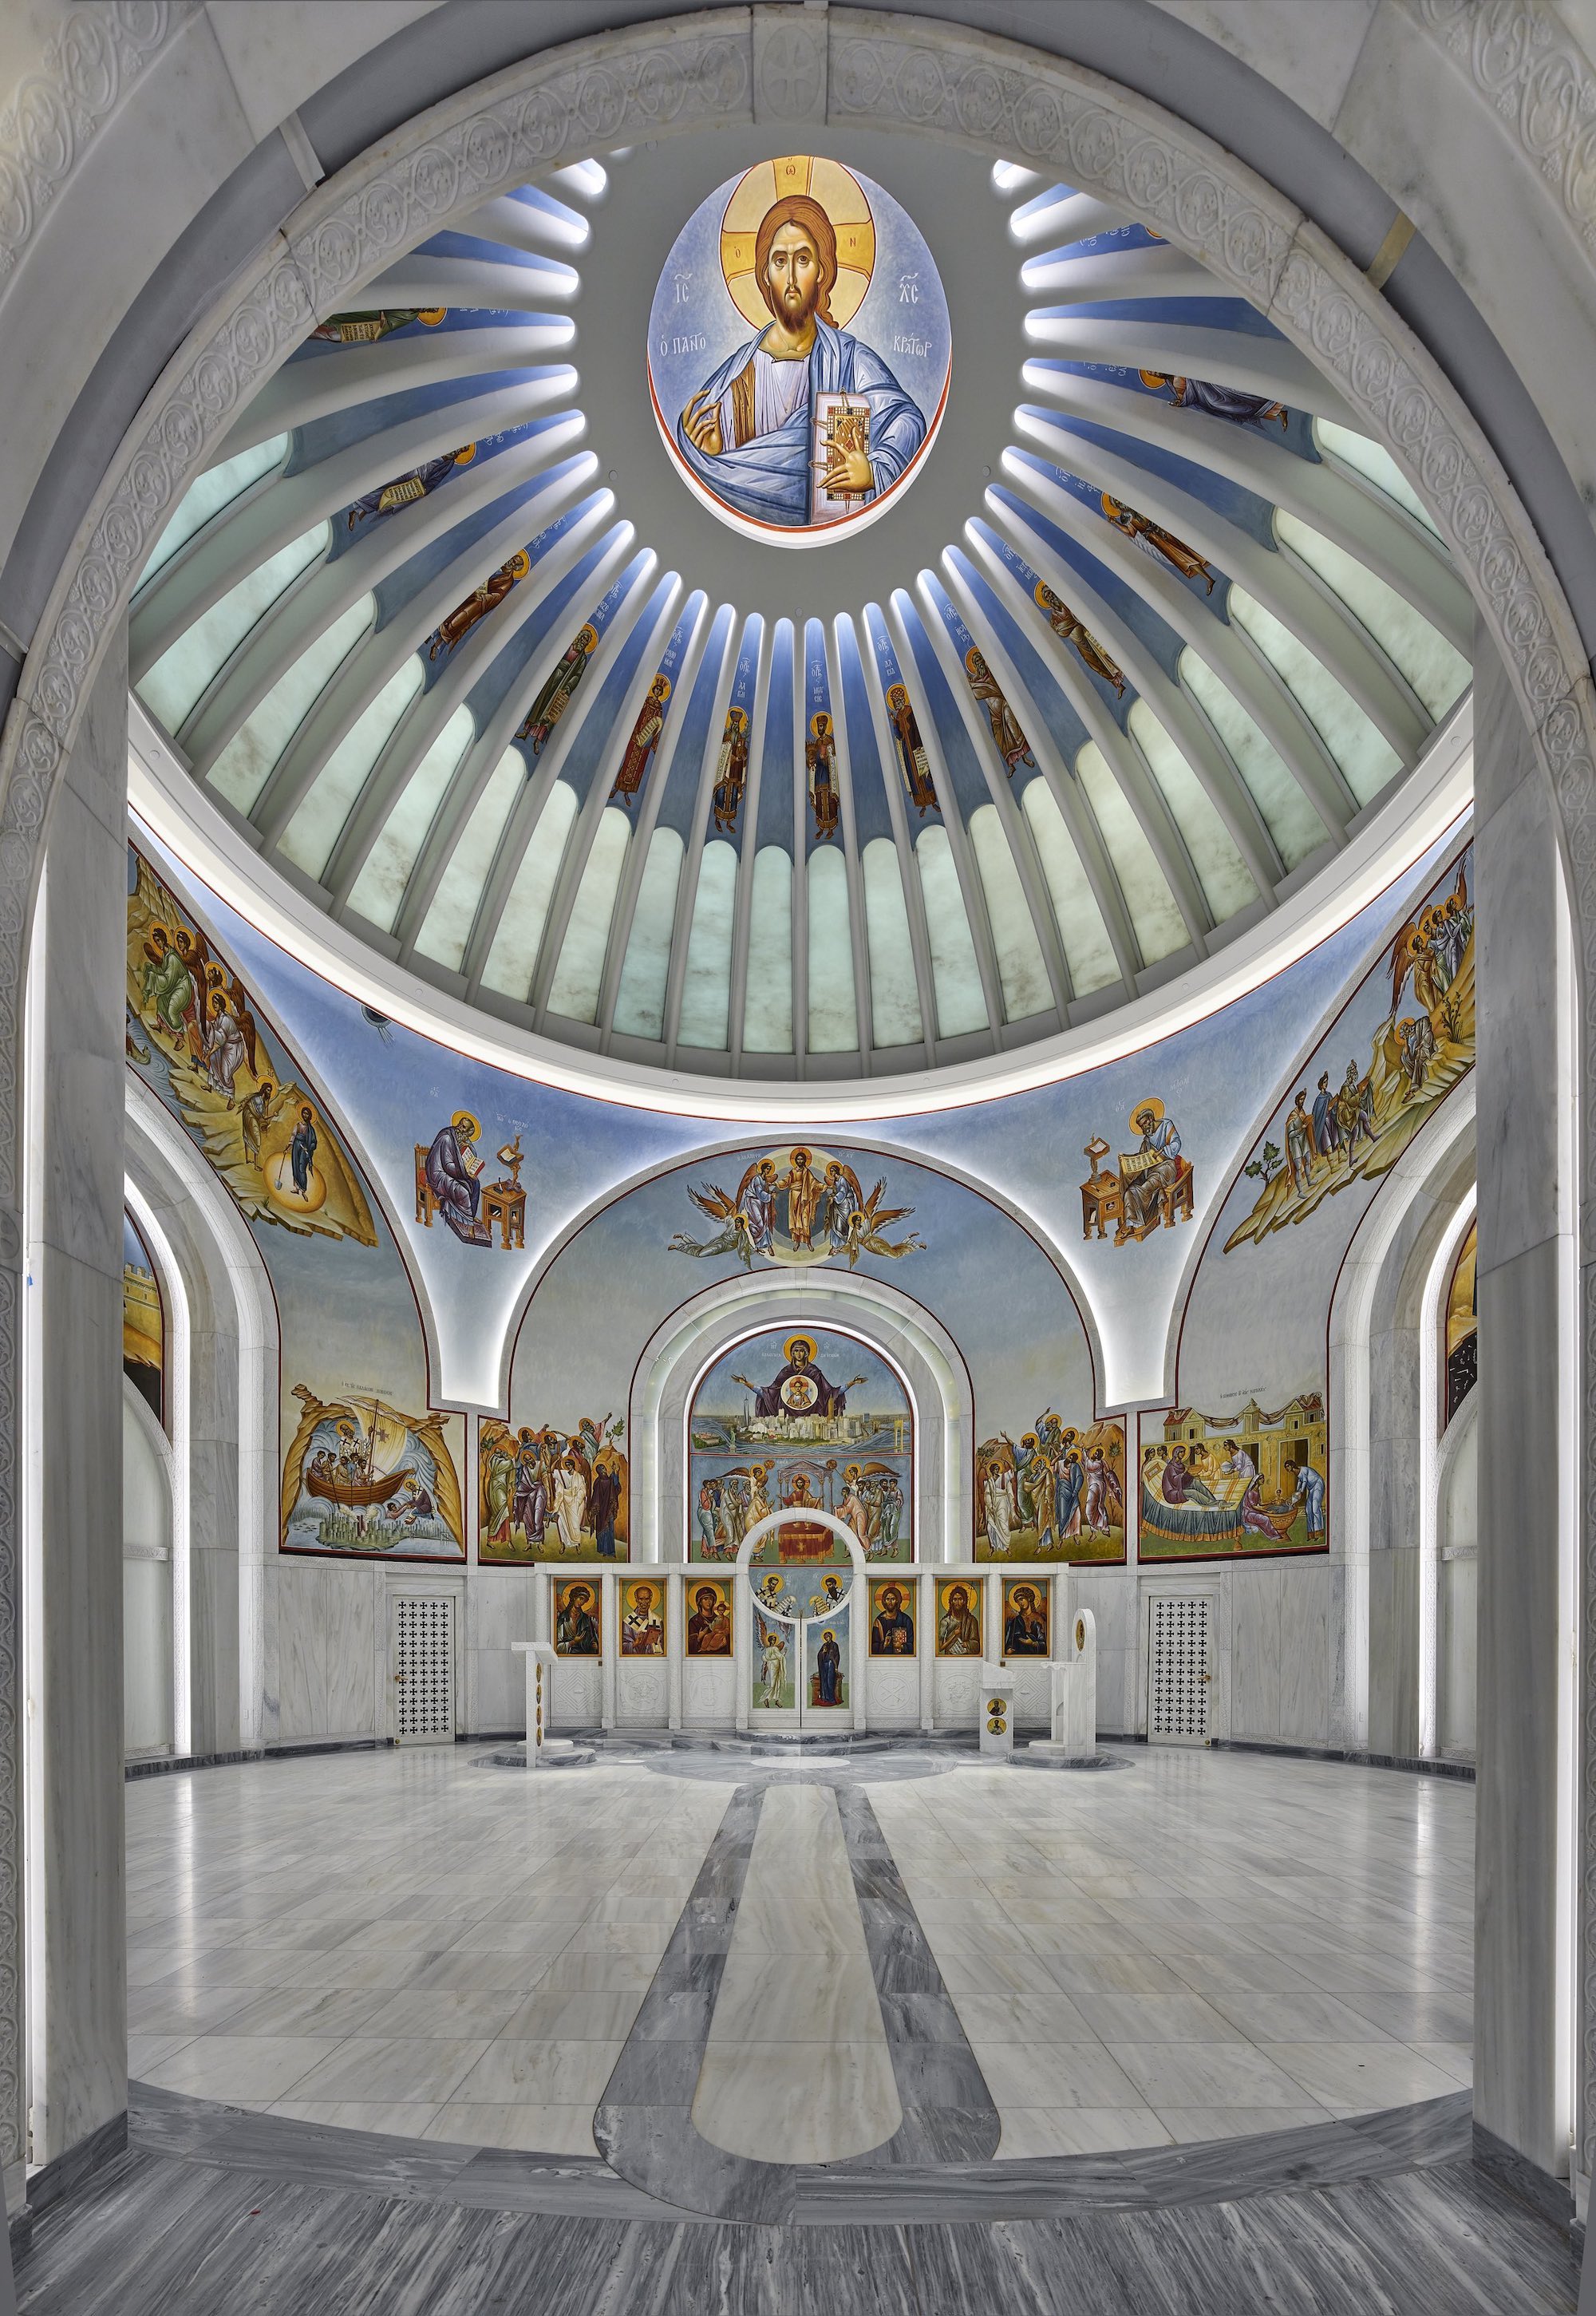 St. Nicholas Greek Orthodox Church and National Shrine Angle from the Narthax into the Nave - Photo(s) © Alan Karchmer for Santiago Calatrava